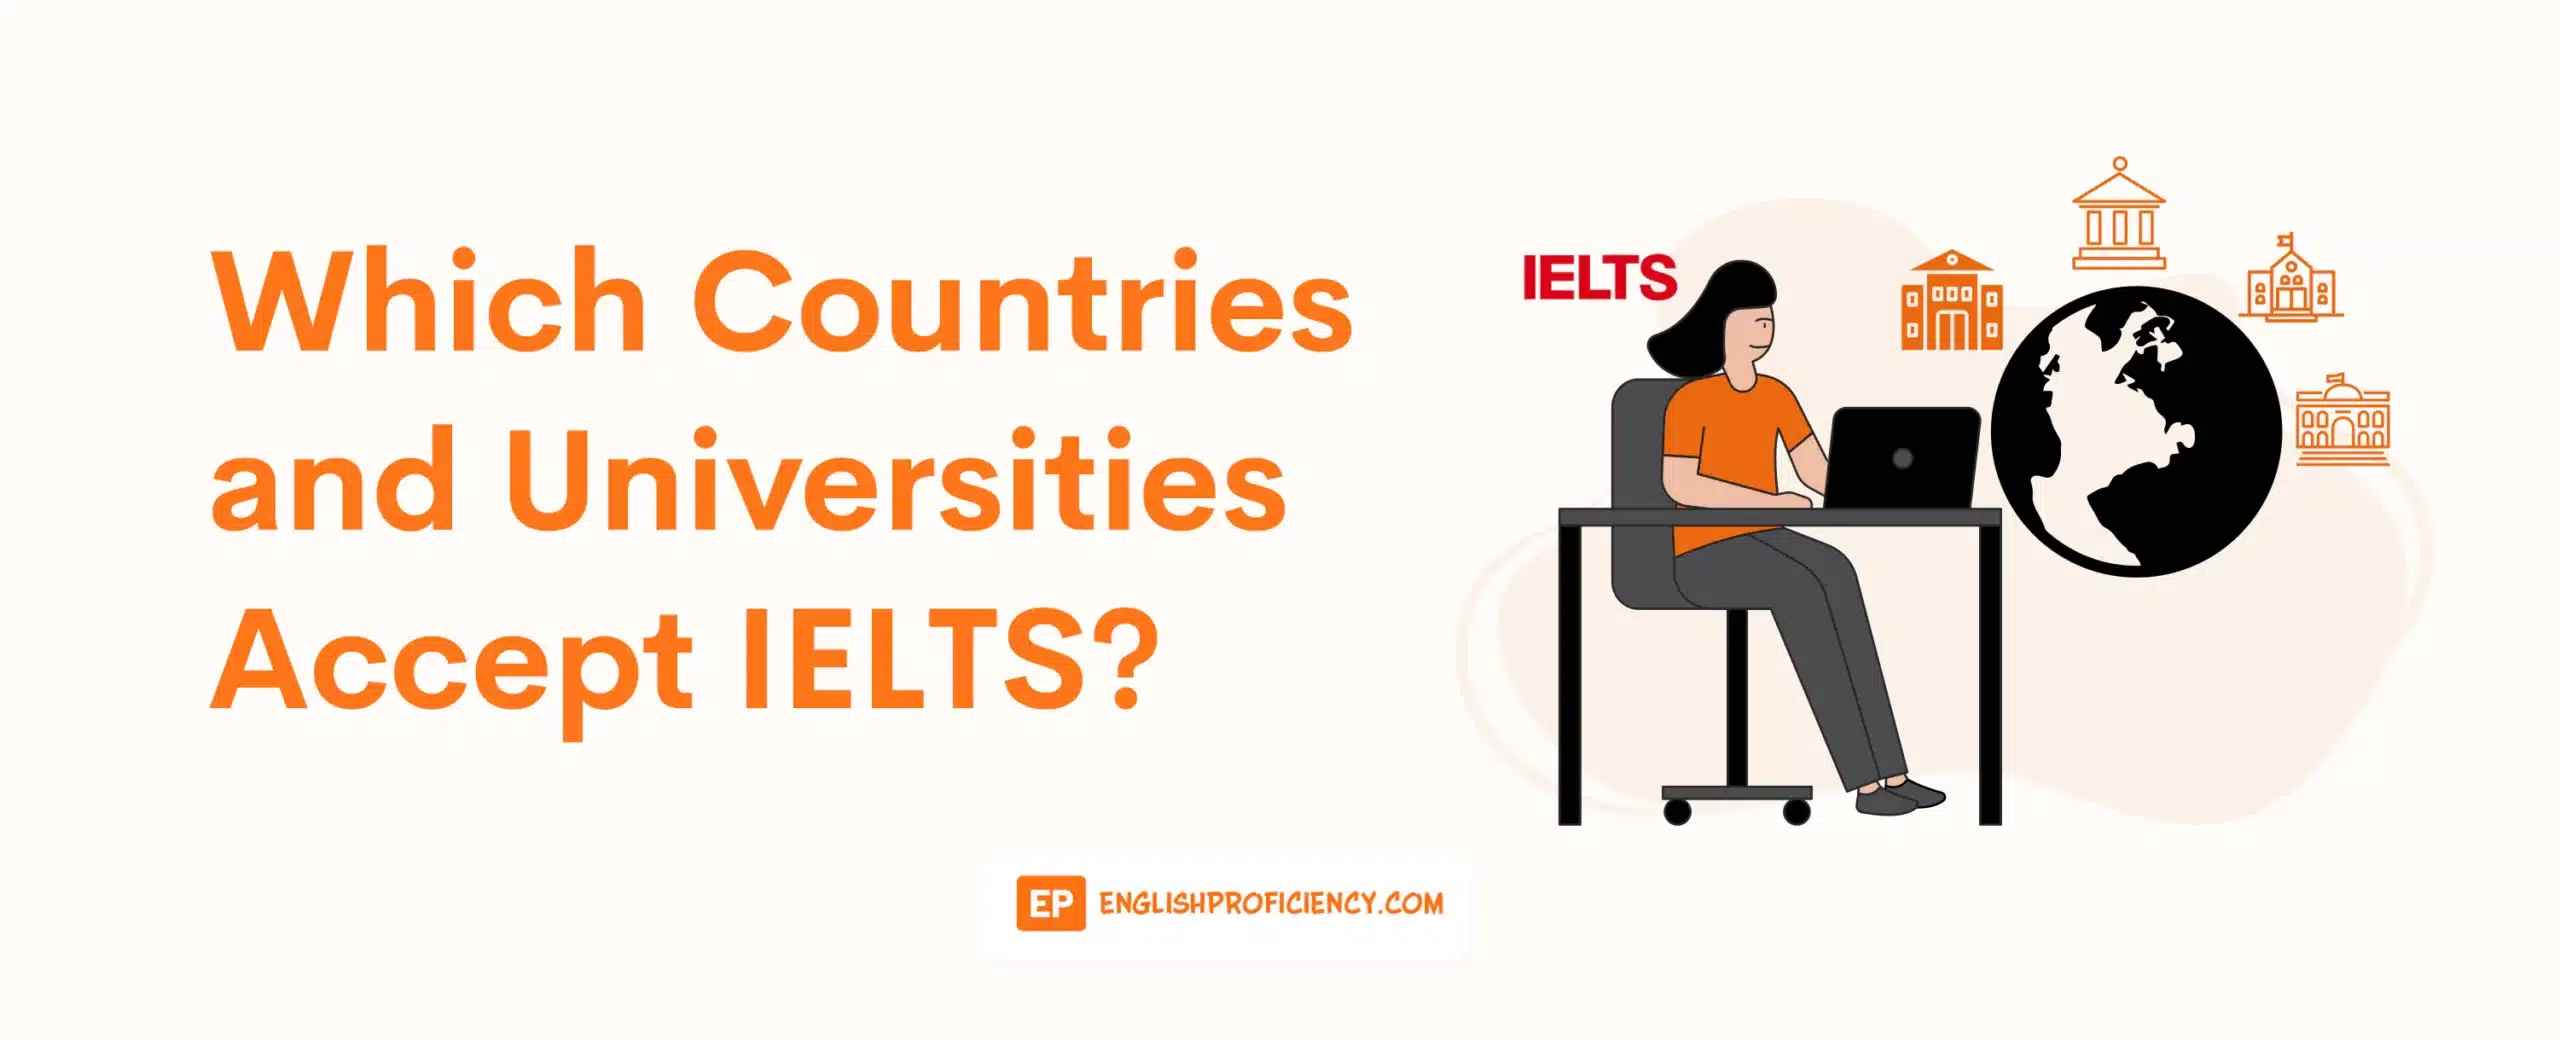 Which Countries and Universities Accept IELTS